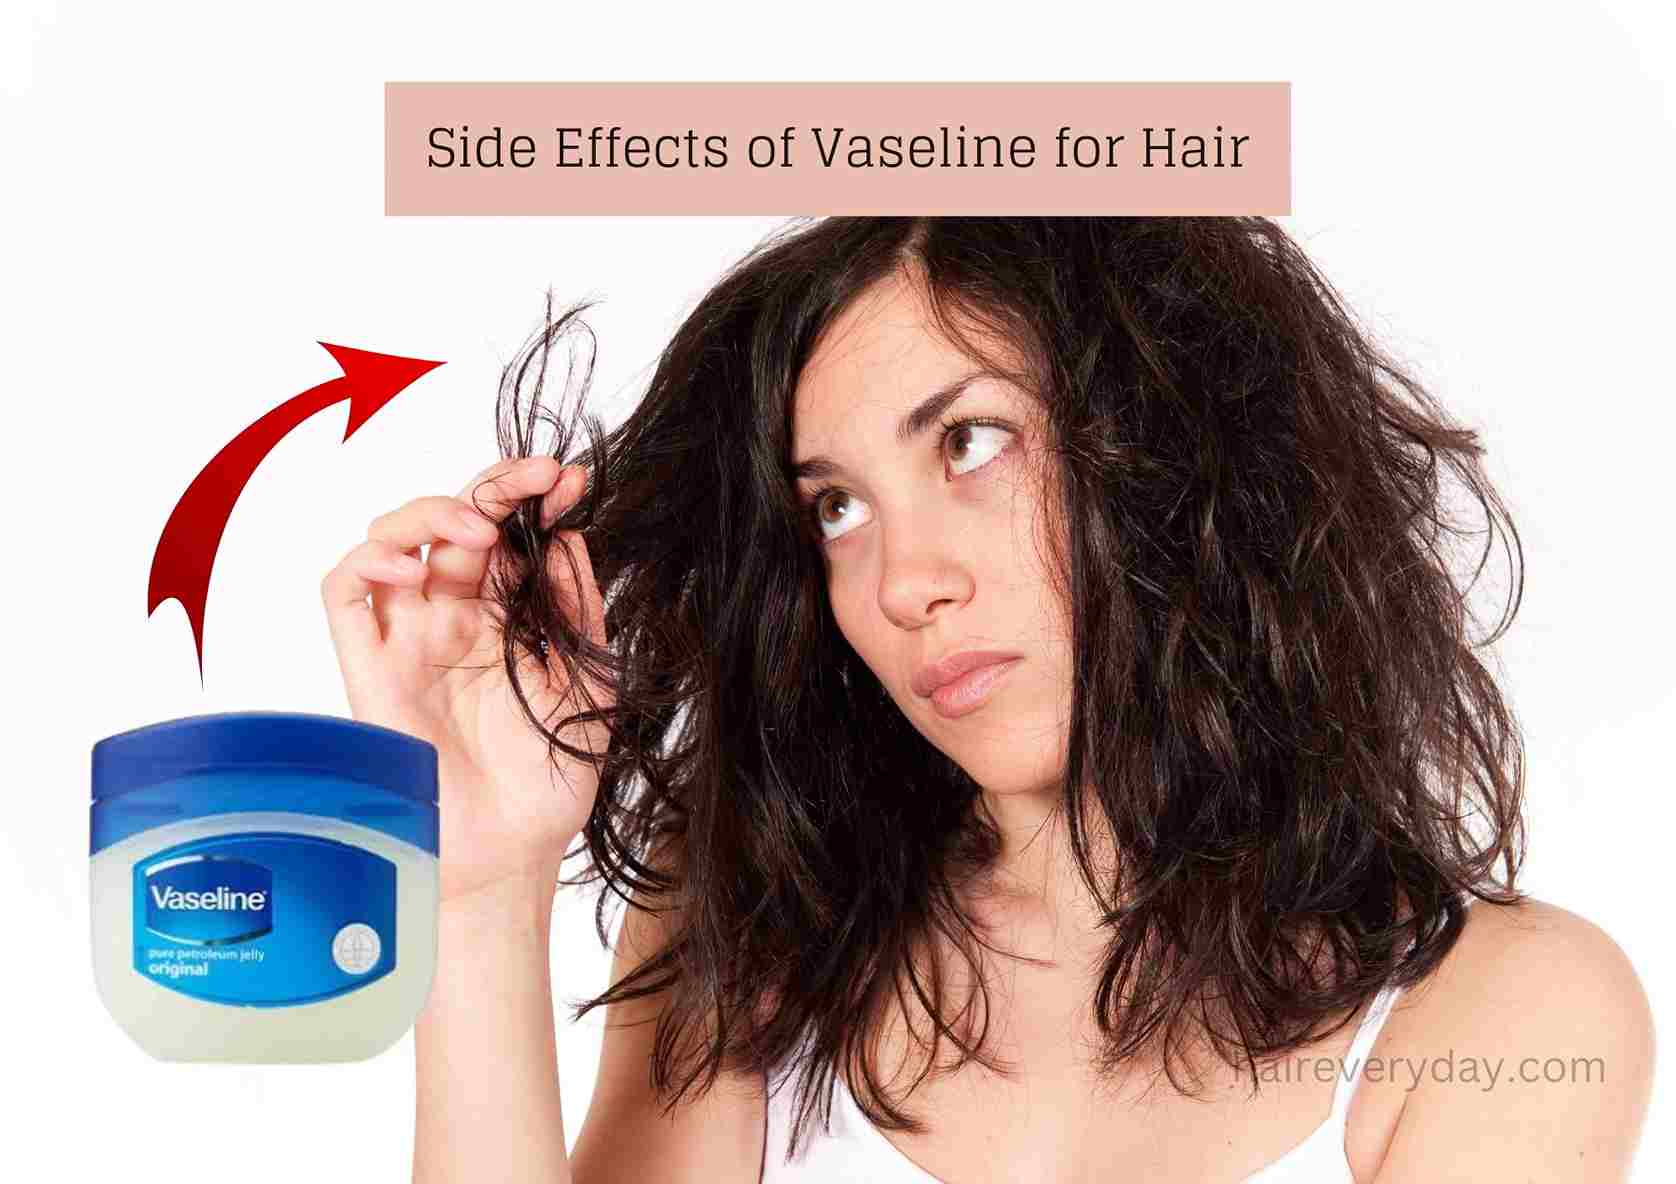 Vaseline For Hair: Is It Safe to Use Petroleum Jelly for Hair Growth?